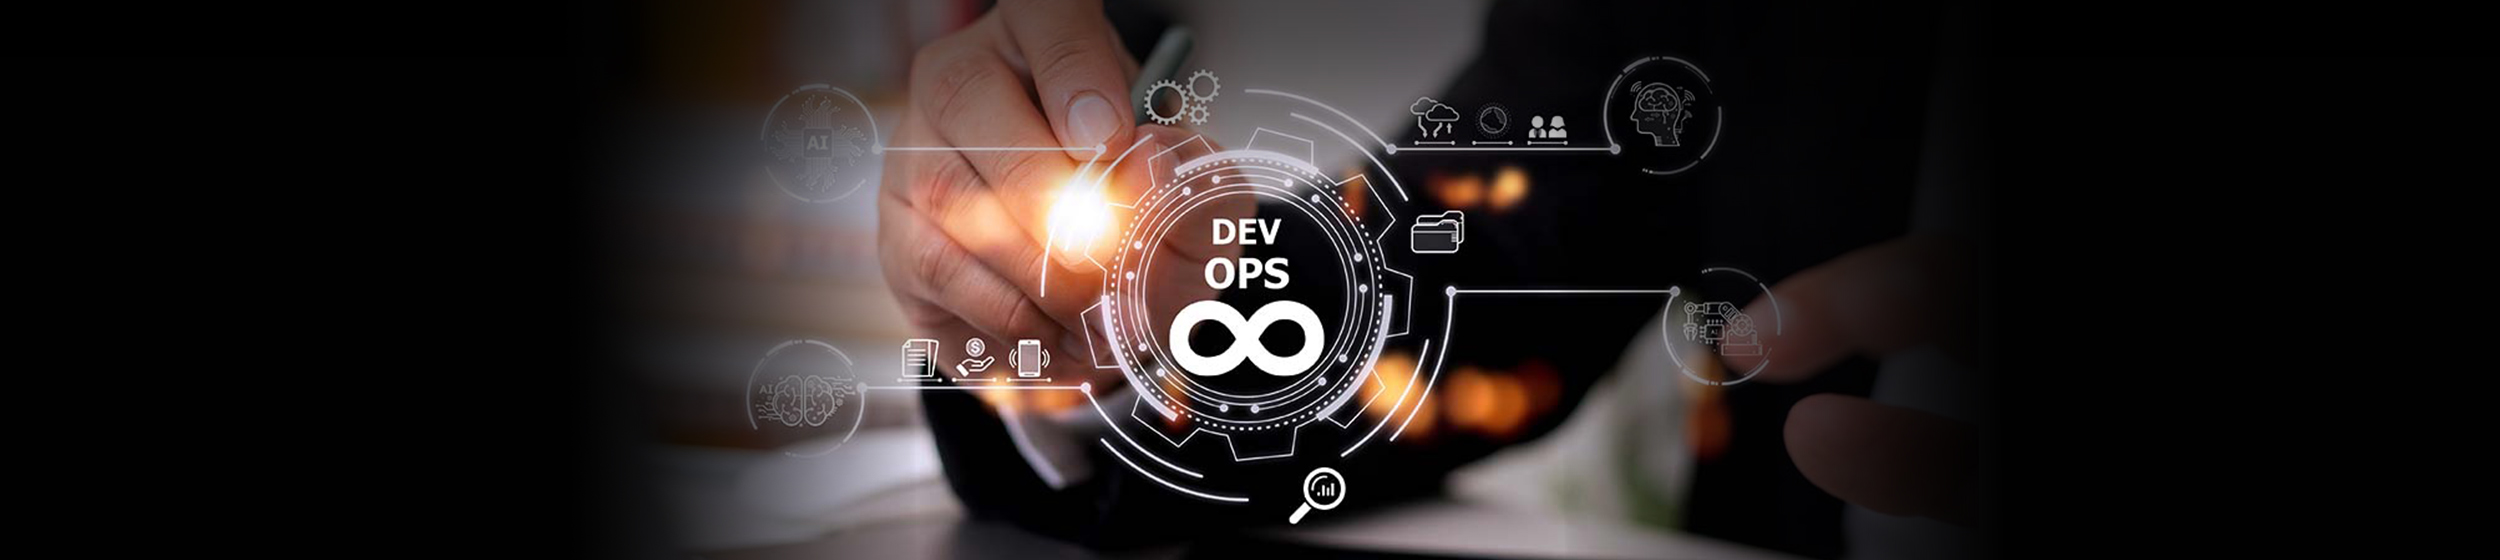 Banner-Implementing DevOps For Continuous Development, Testing, And Delivery To Achieve Faster Time To Market